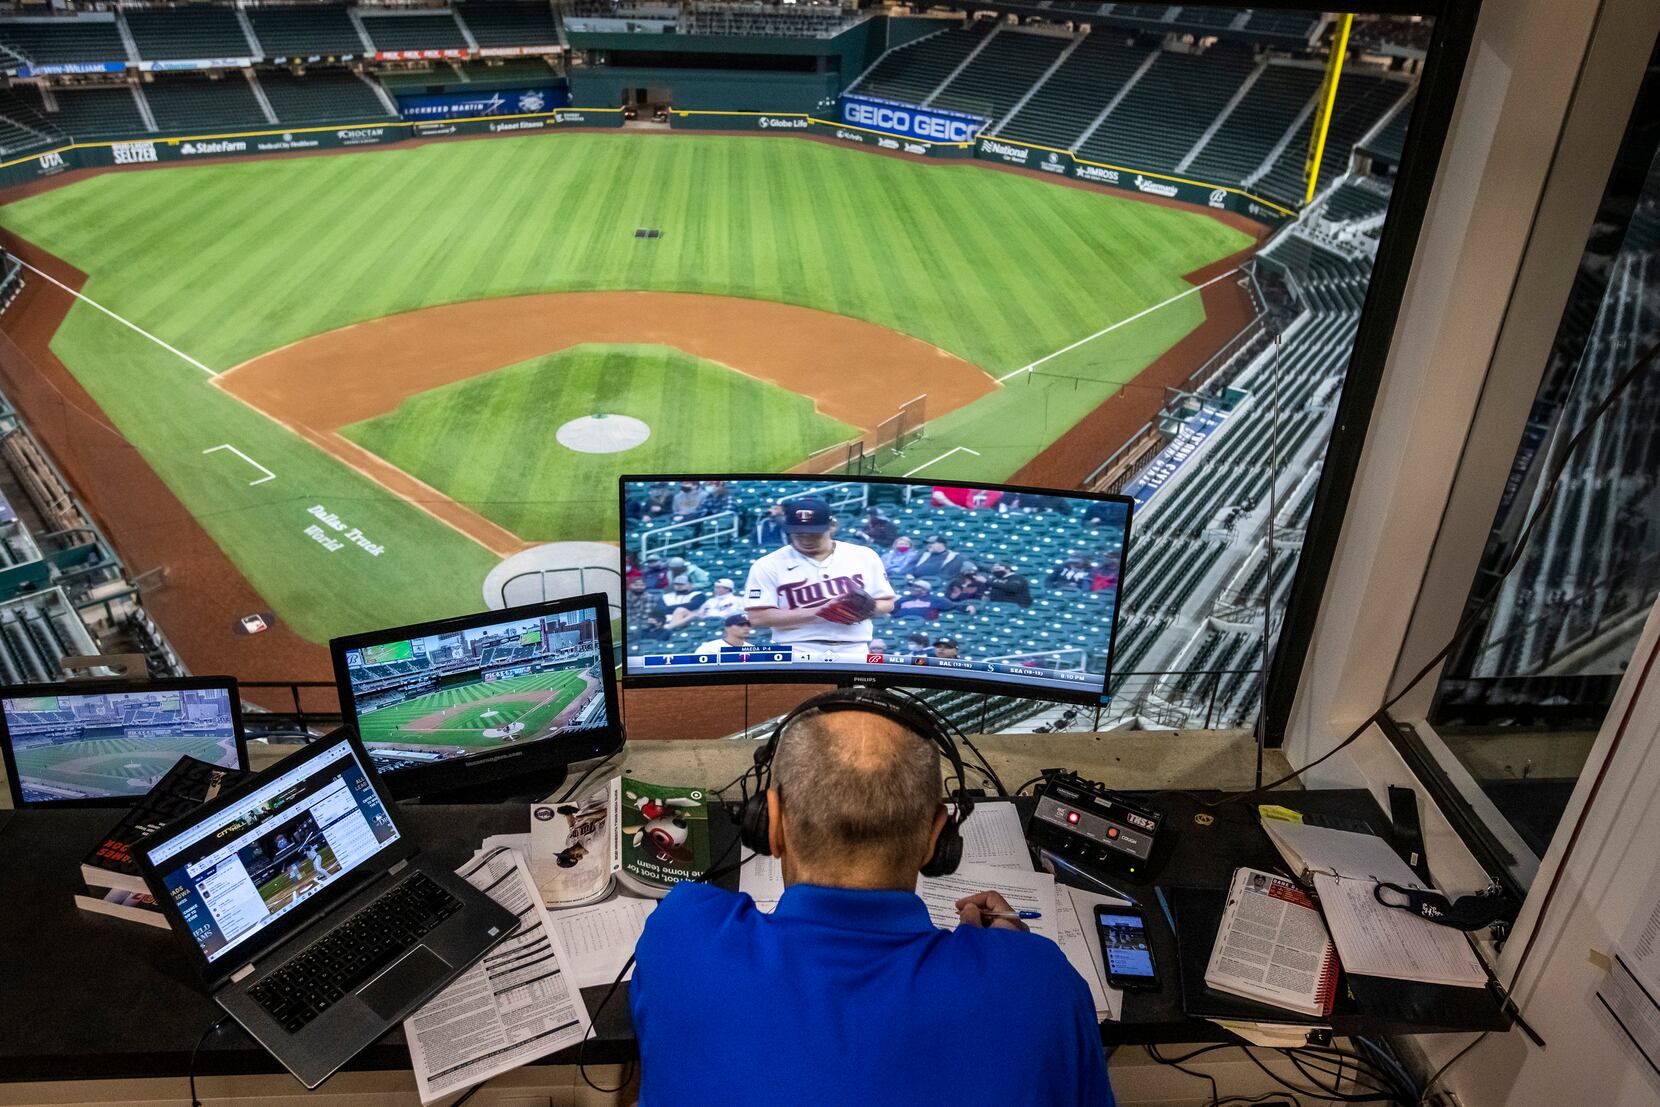 How to Watch the Rangers vs. Twins Game: Streaming & TV Info